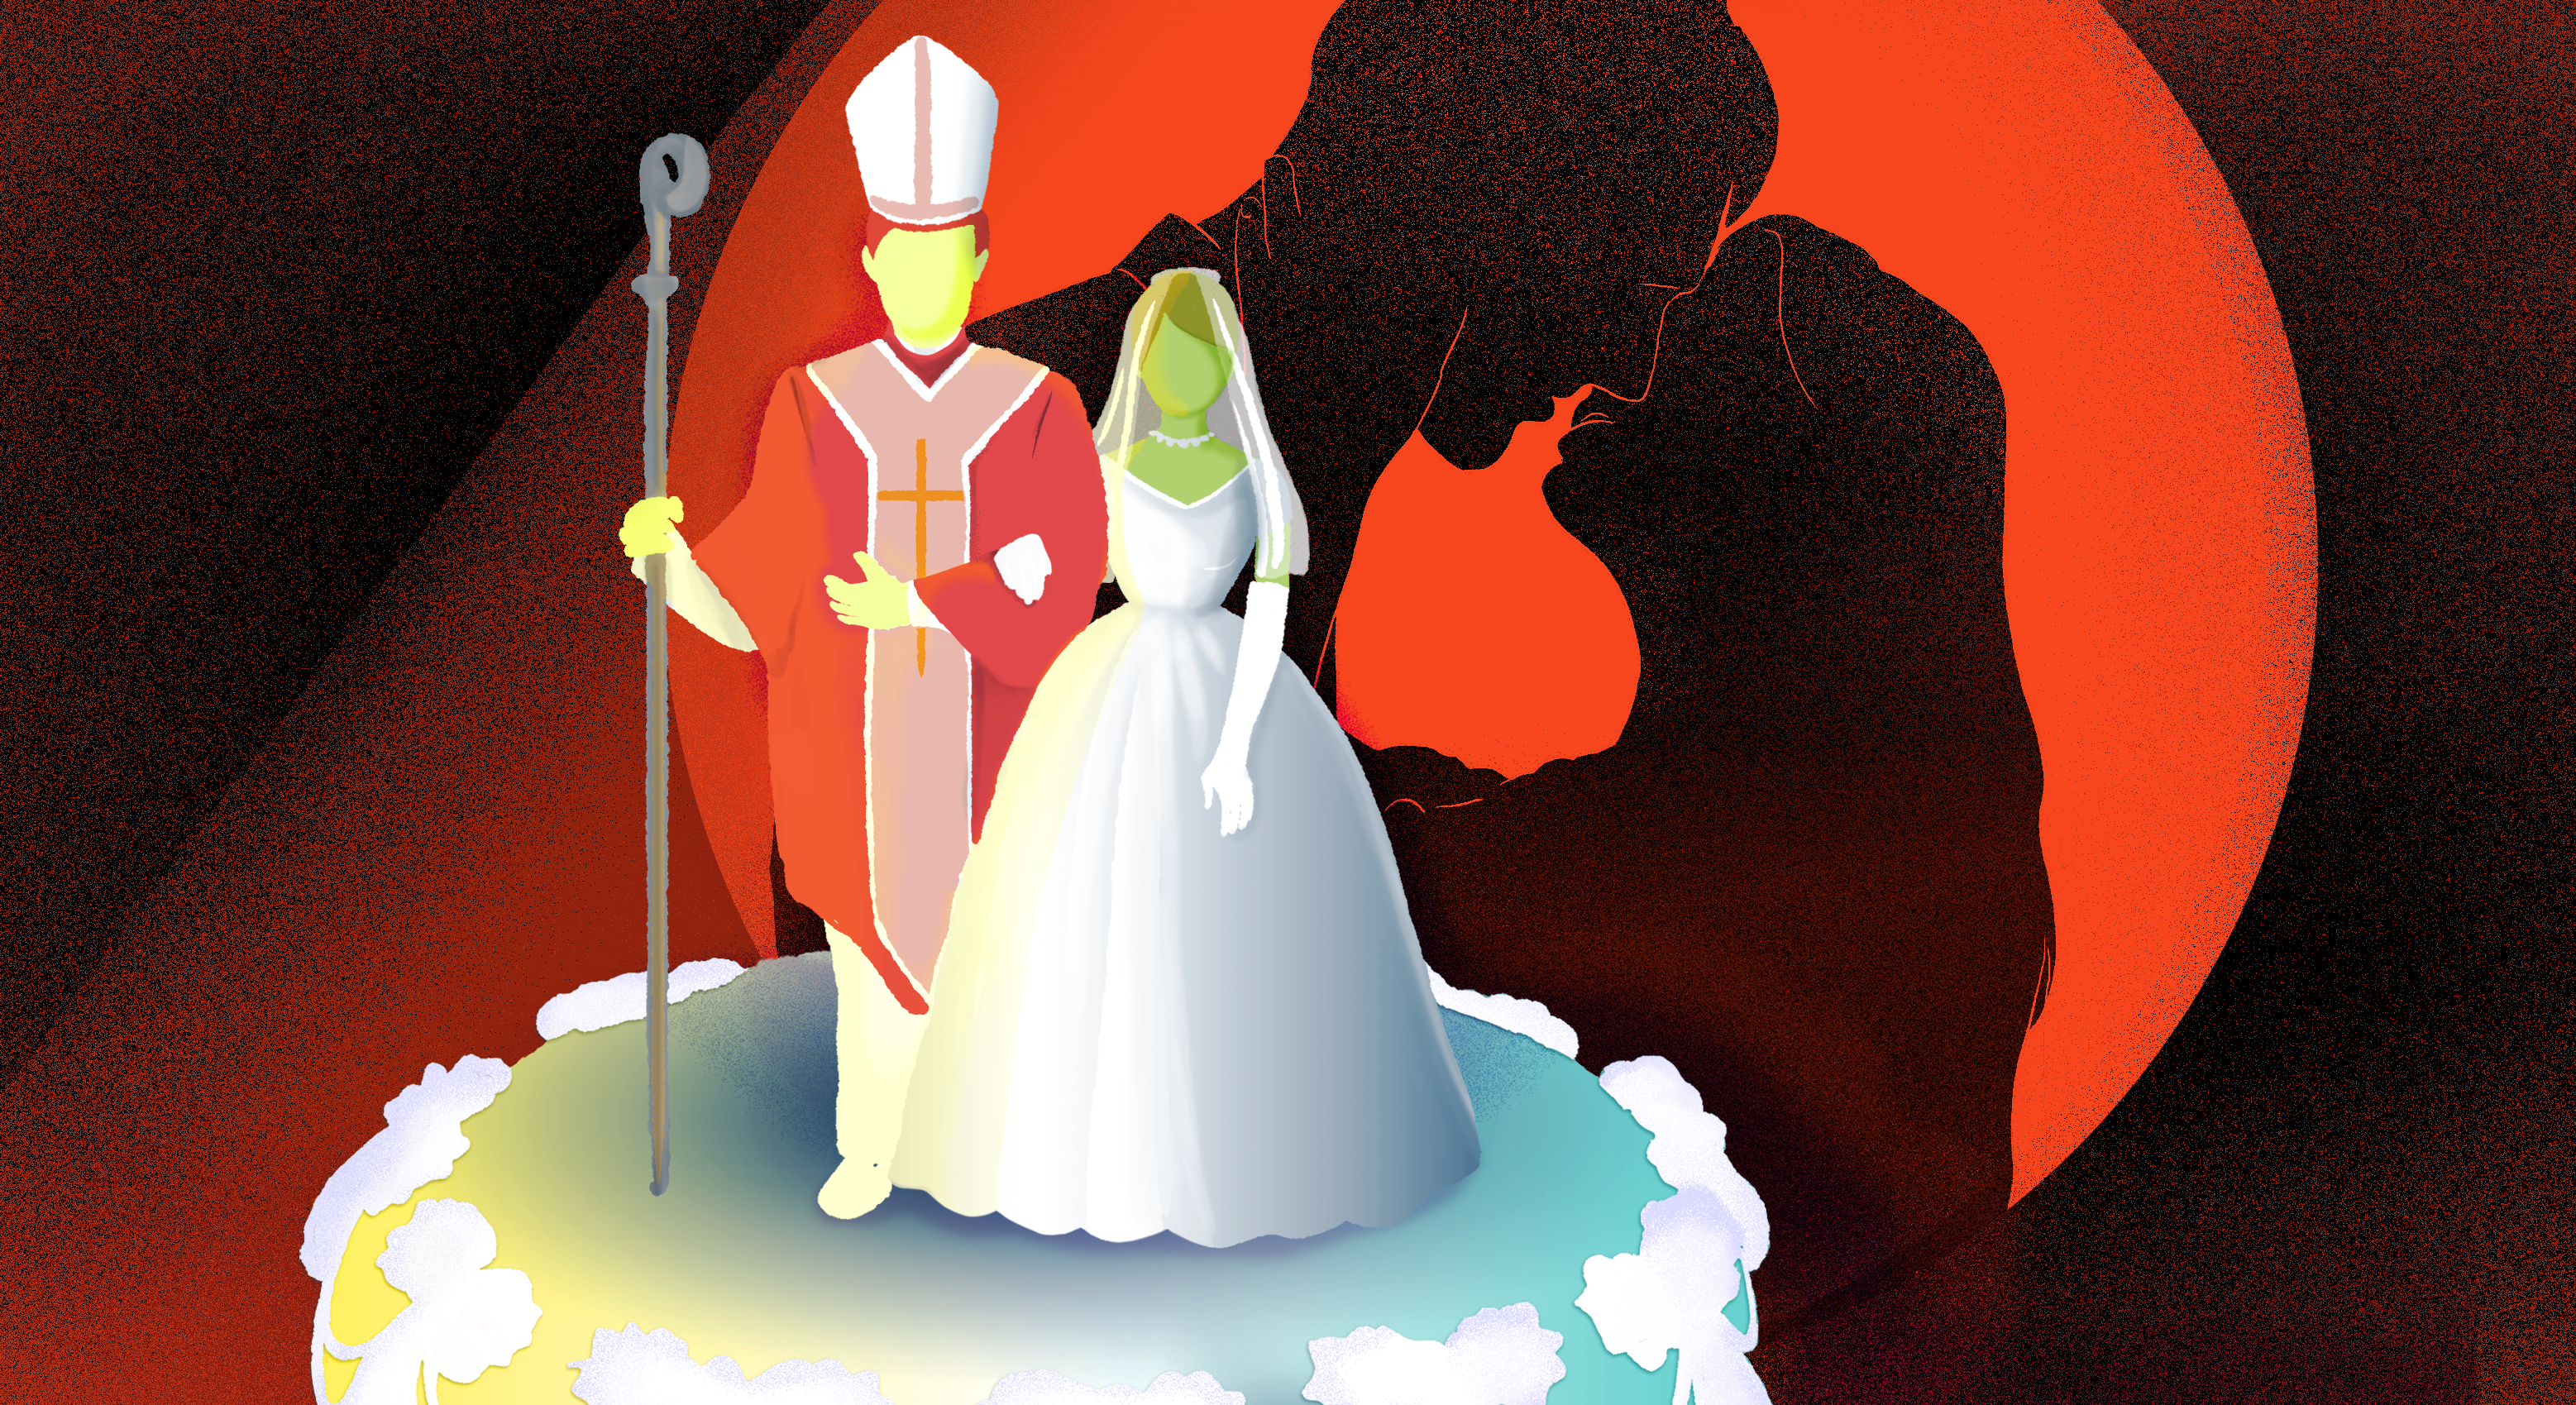 What Would Happen if the Catholic Church Let Priests Have